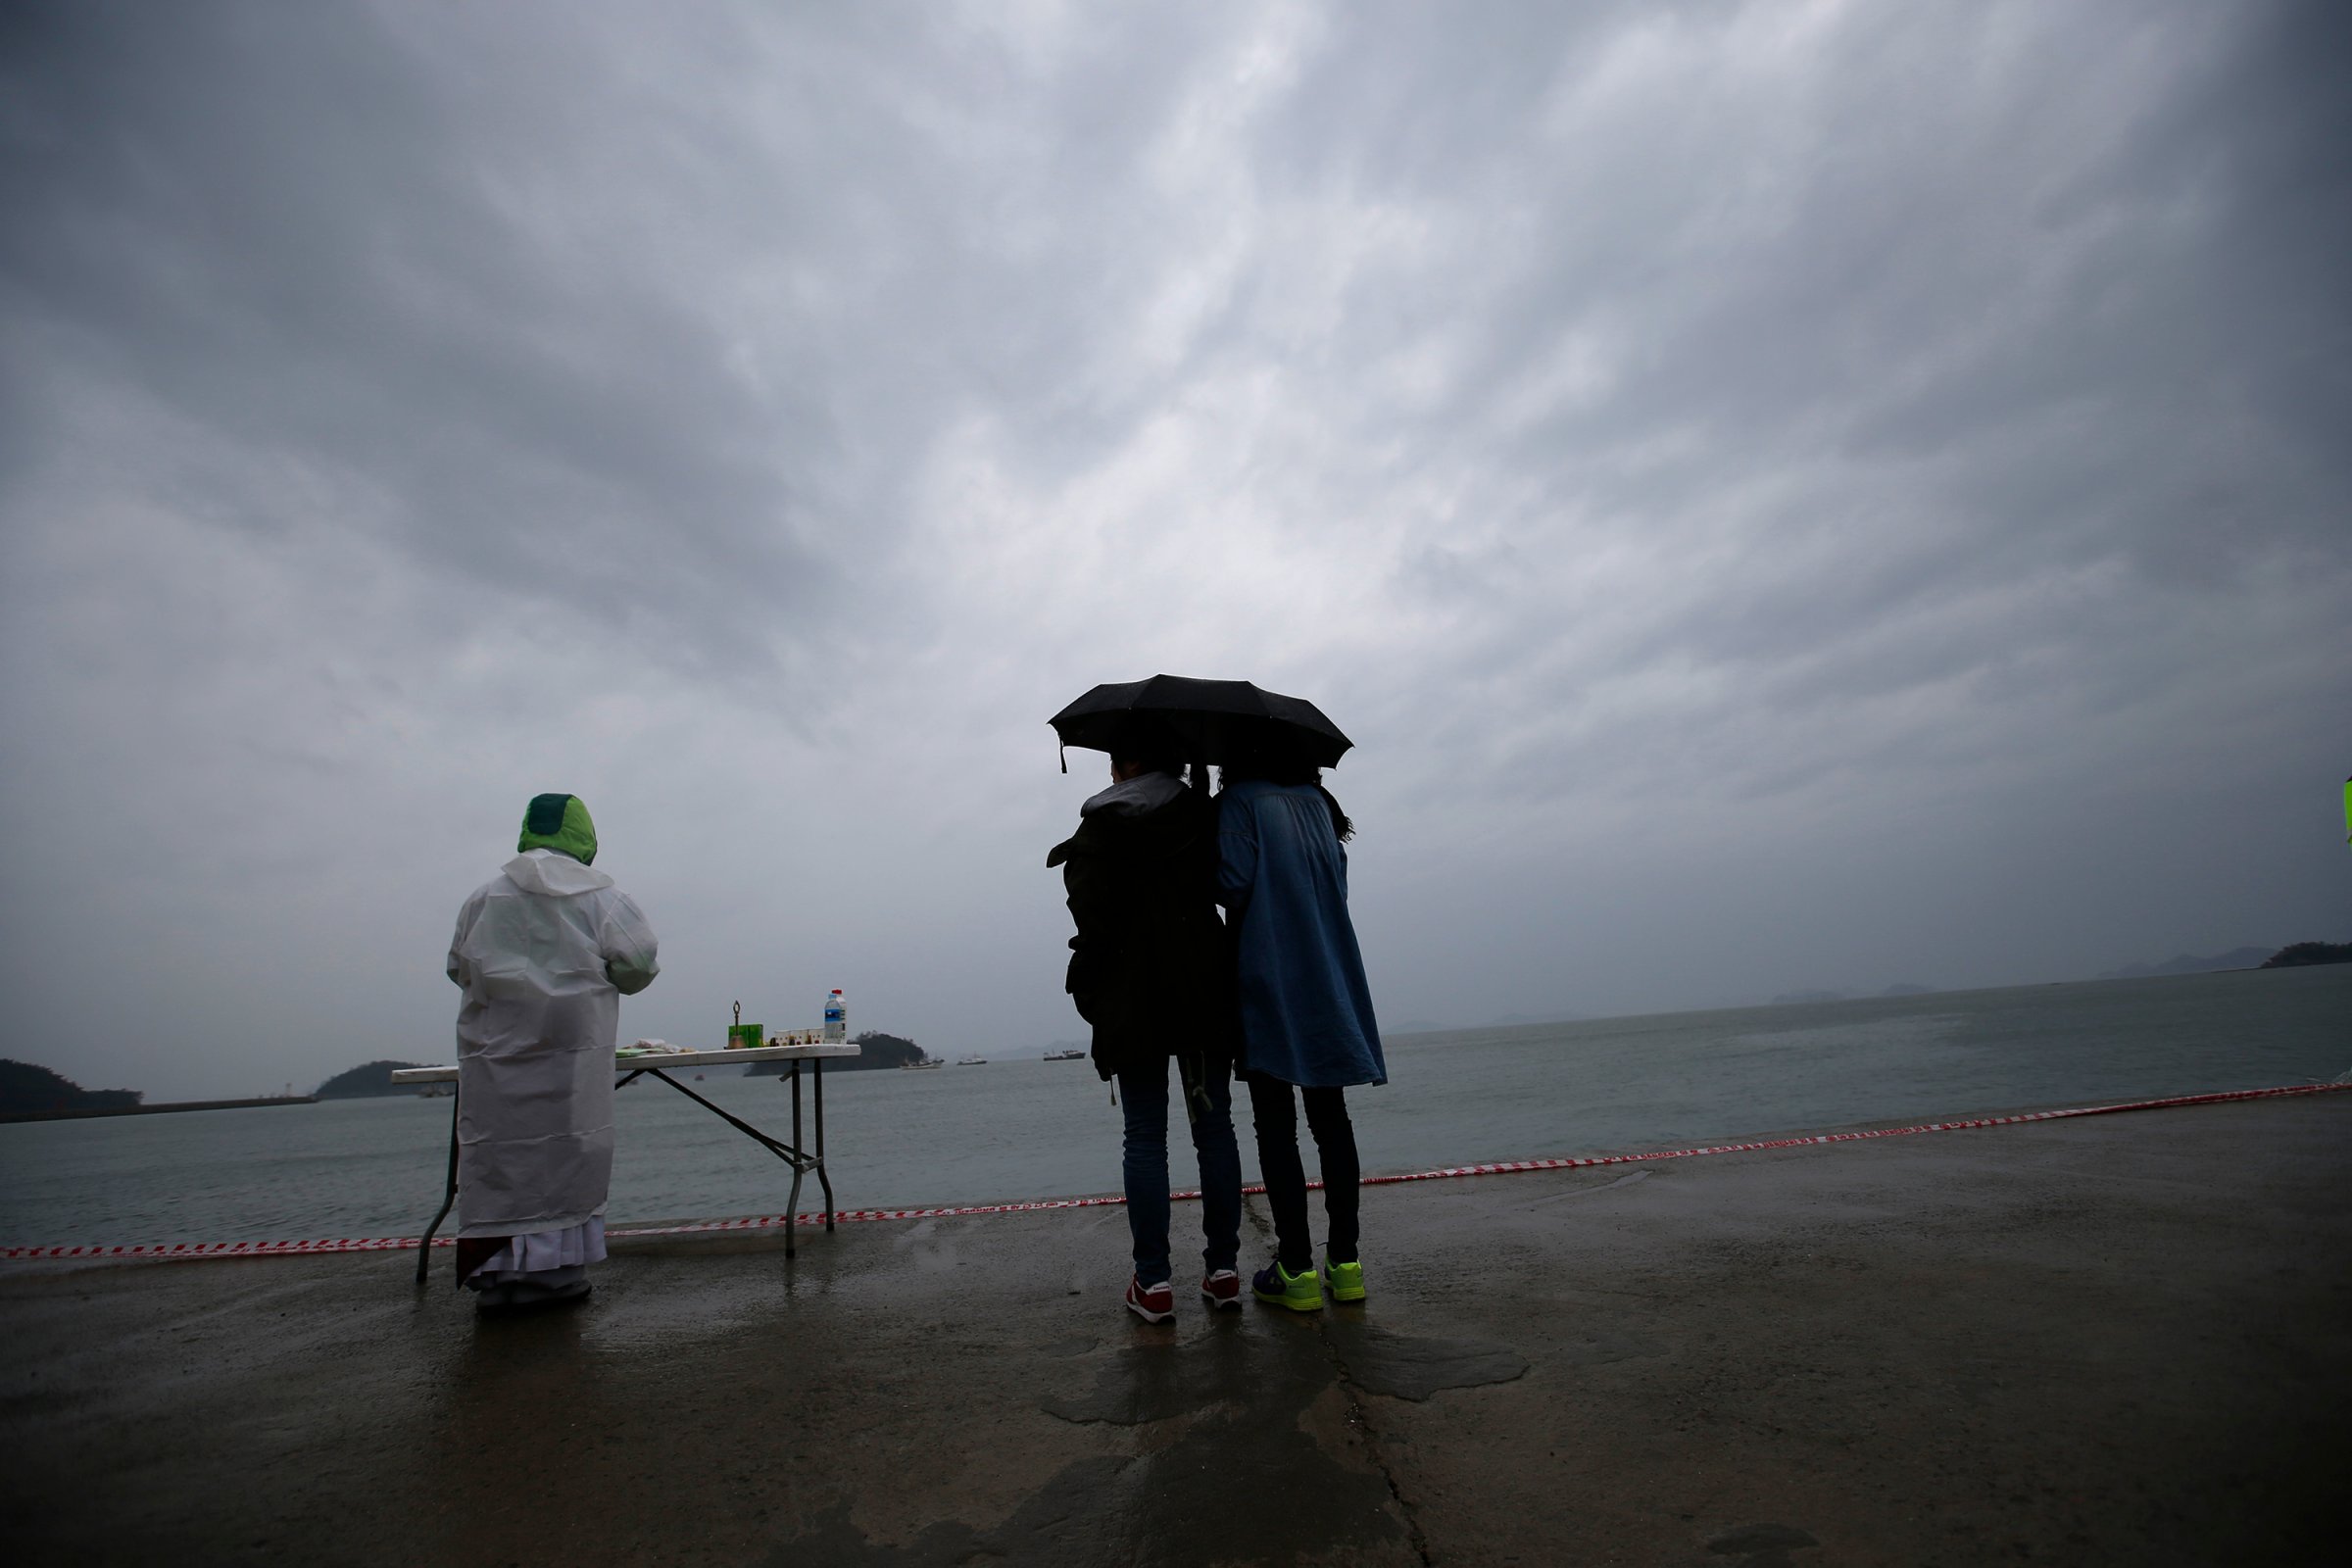 Relatives of a missing passenger onboard the capsized Sewol ferry, looks at the sea while a Buddhist monk prays for the victims at a port in the rain in Jindo